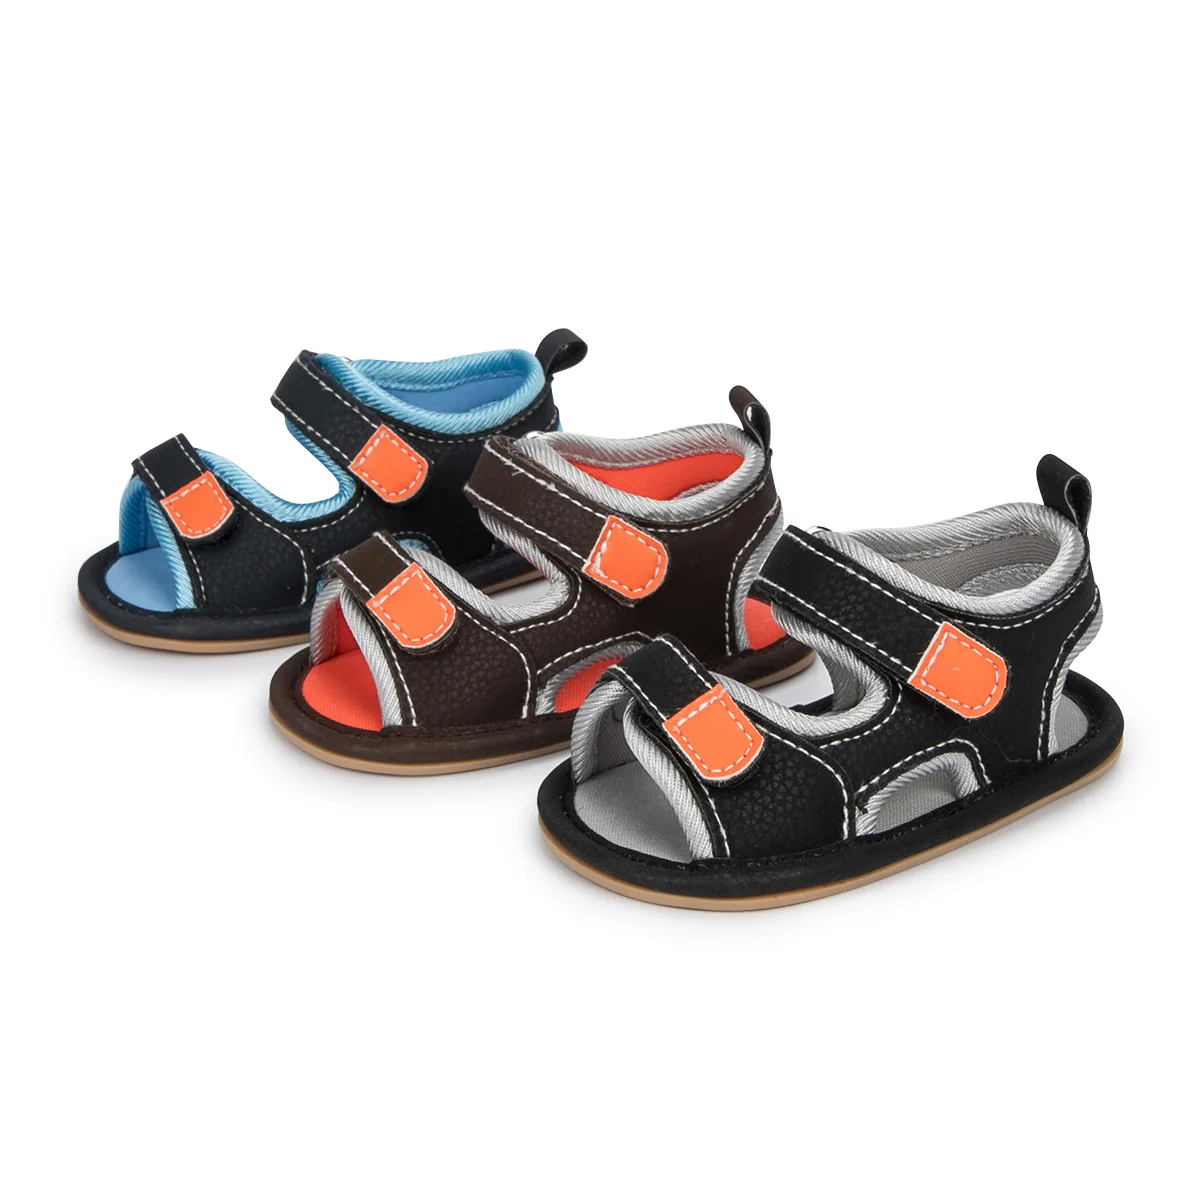 

Newborn Baby Boy Sandals Shoes Baby Summer Sandals Rubber Soles Crib Shoes Toddler Shoes First Walkers 0-18M